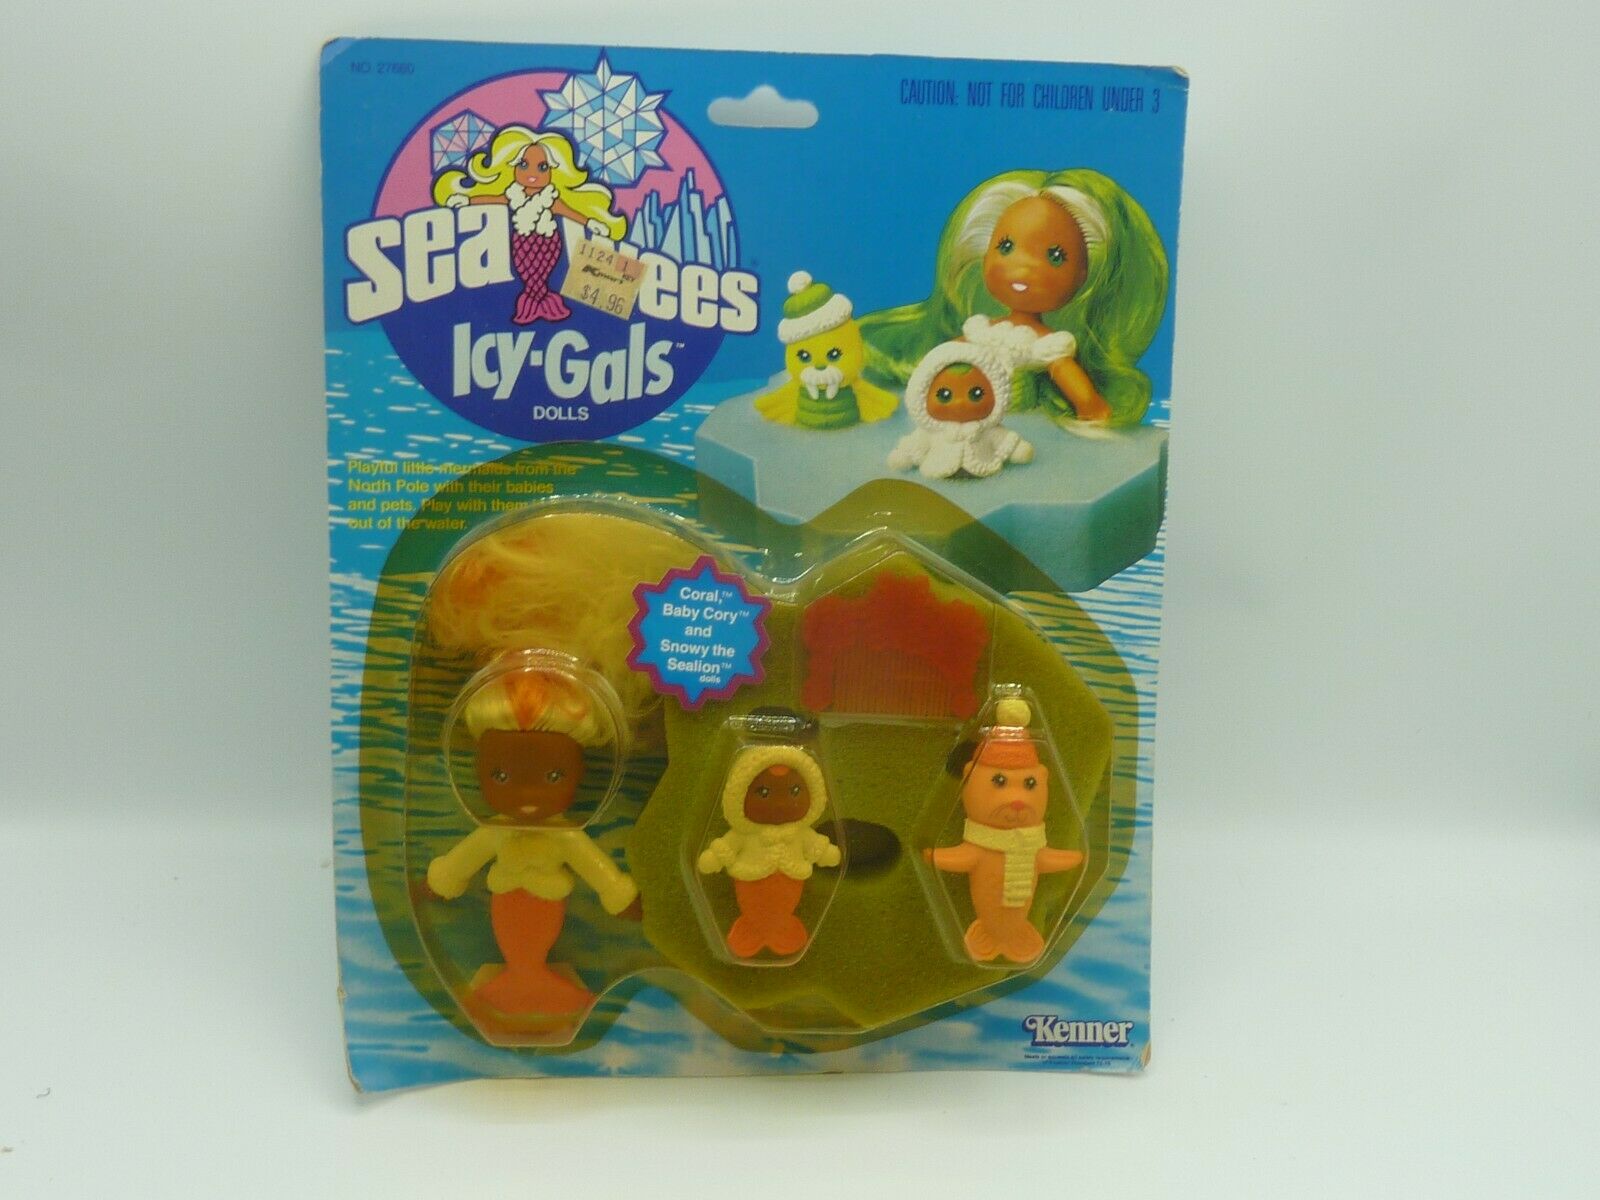 Vintage Sea Wees Icy Gals Coral Baby And Snowy Sealion Set Moc Sealed New Card